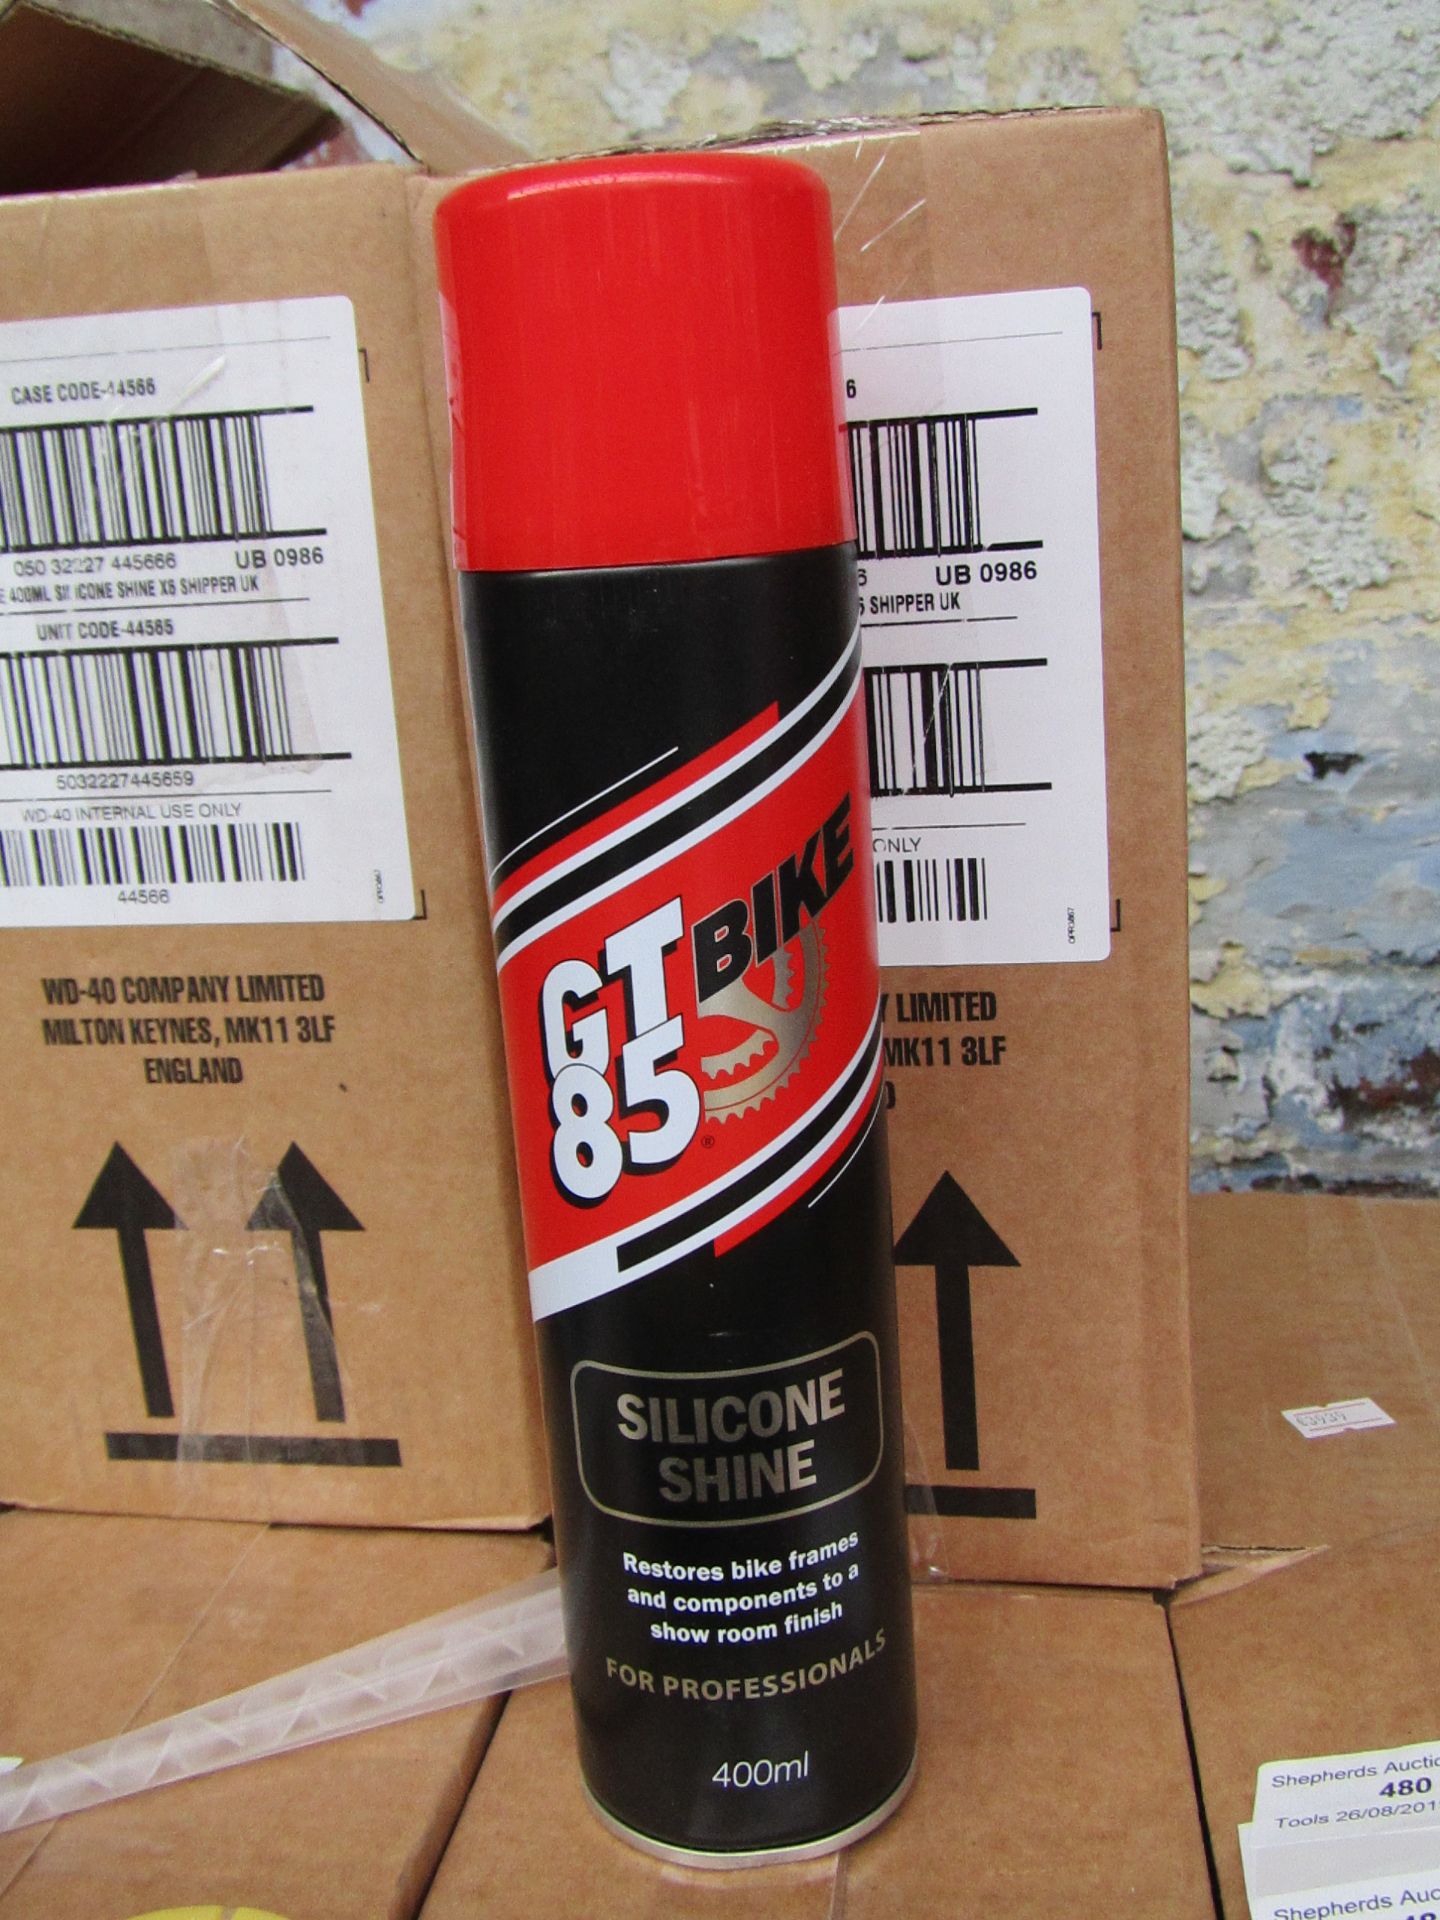 6x 400ml GT Bike 85 silicone shine RRP £6.99 each, all new and boxed.